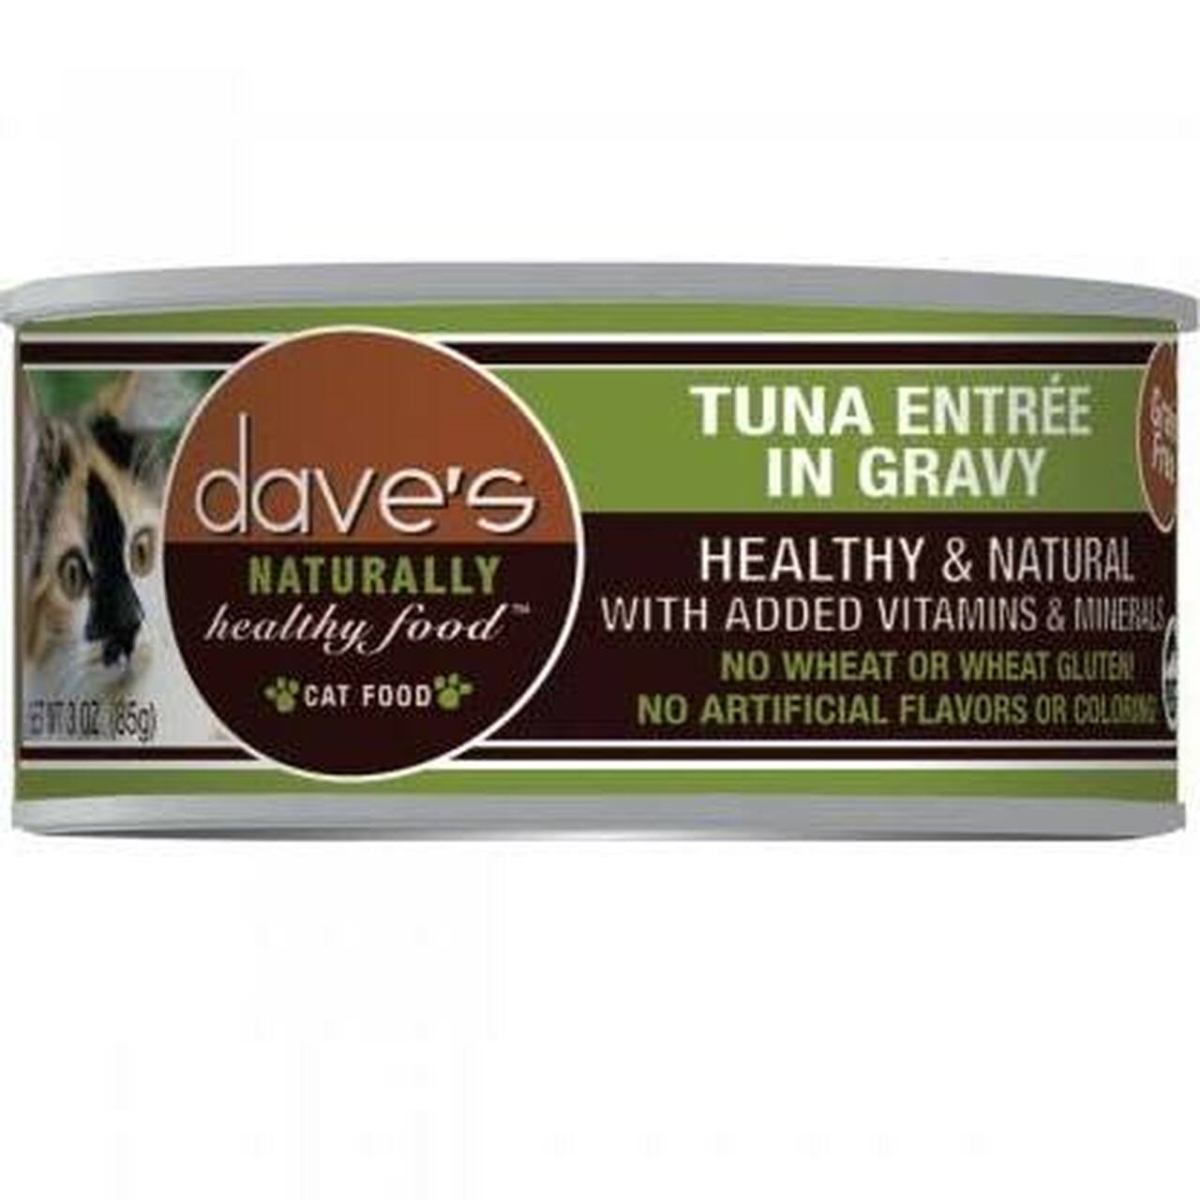 Picture of Daves Pet Food 685038113276 Tuna Entree In Gravy Naturally Healthy Cat Food - Case of 24